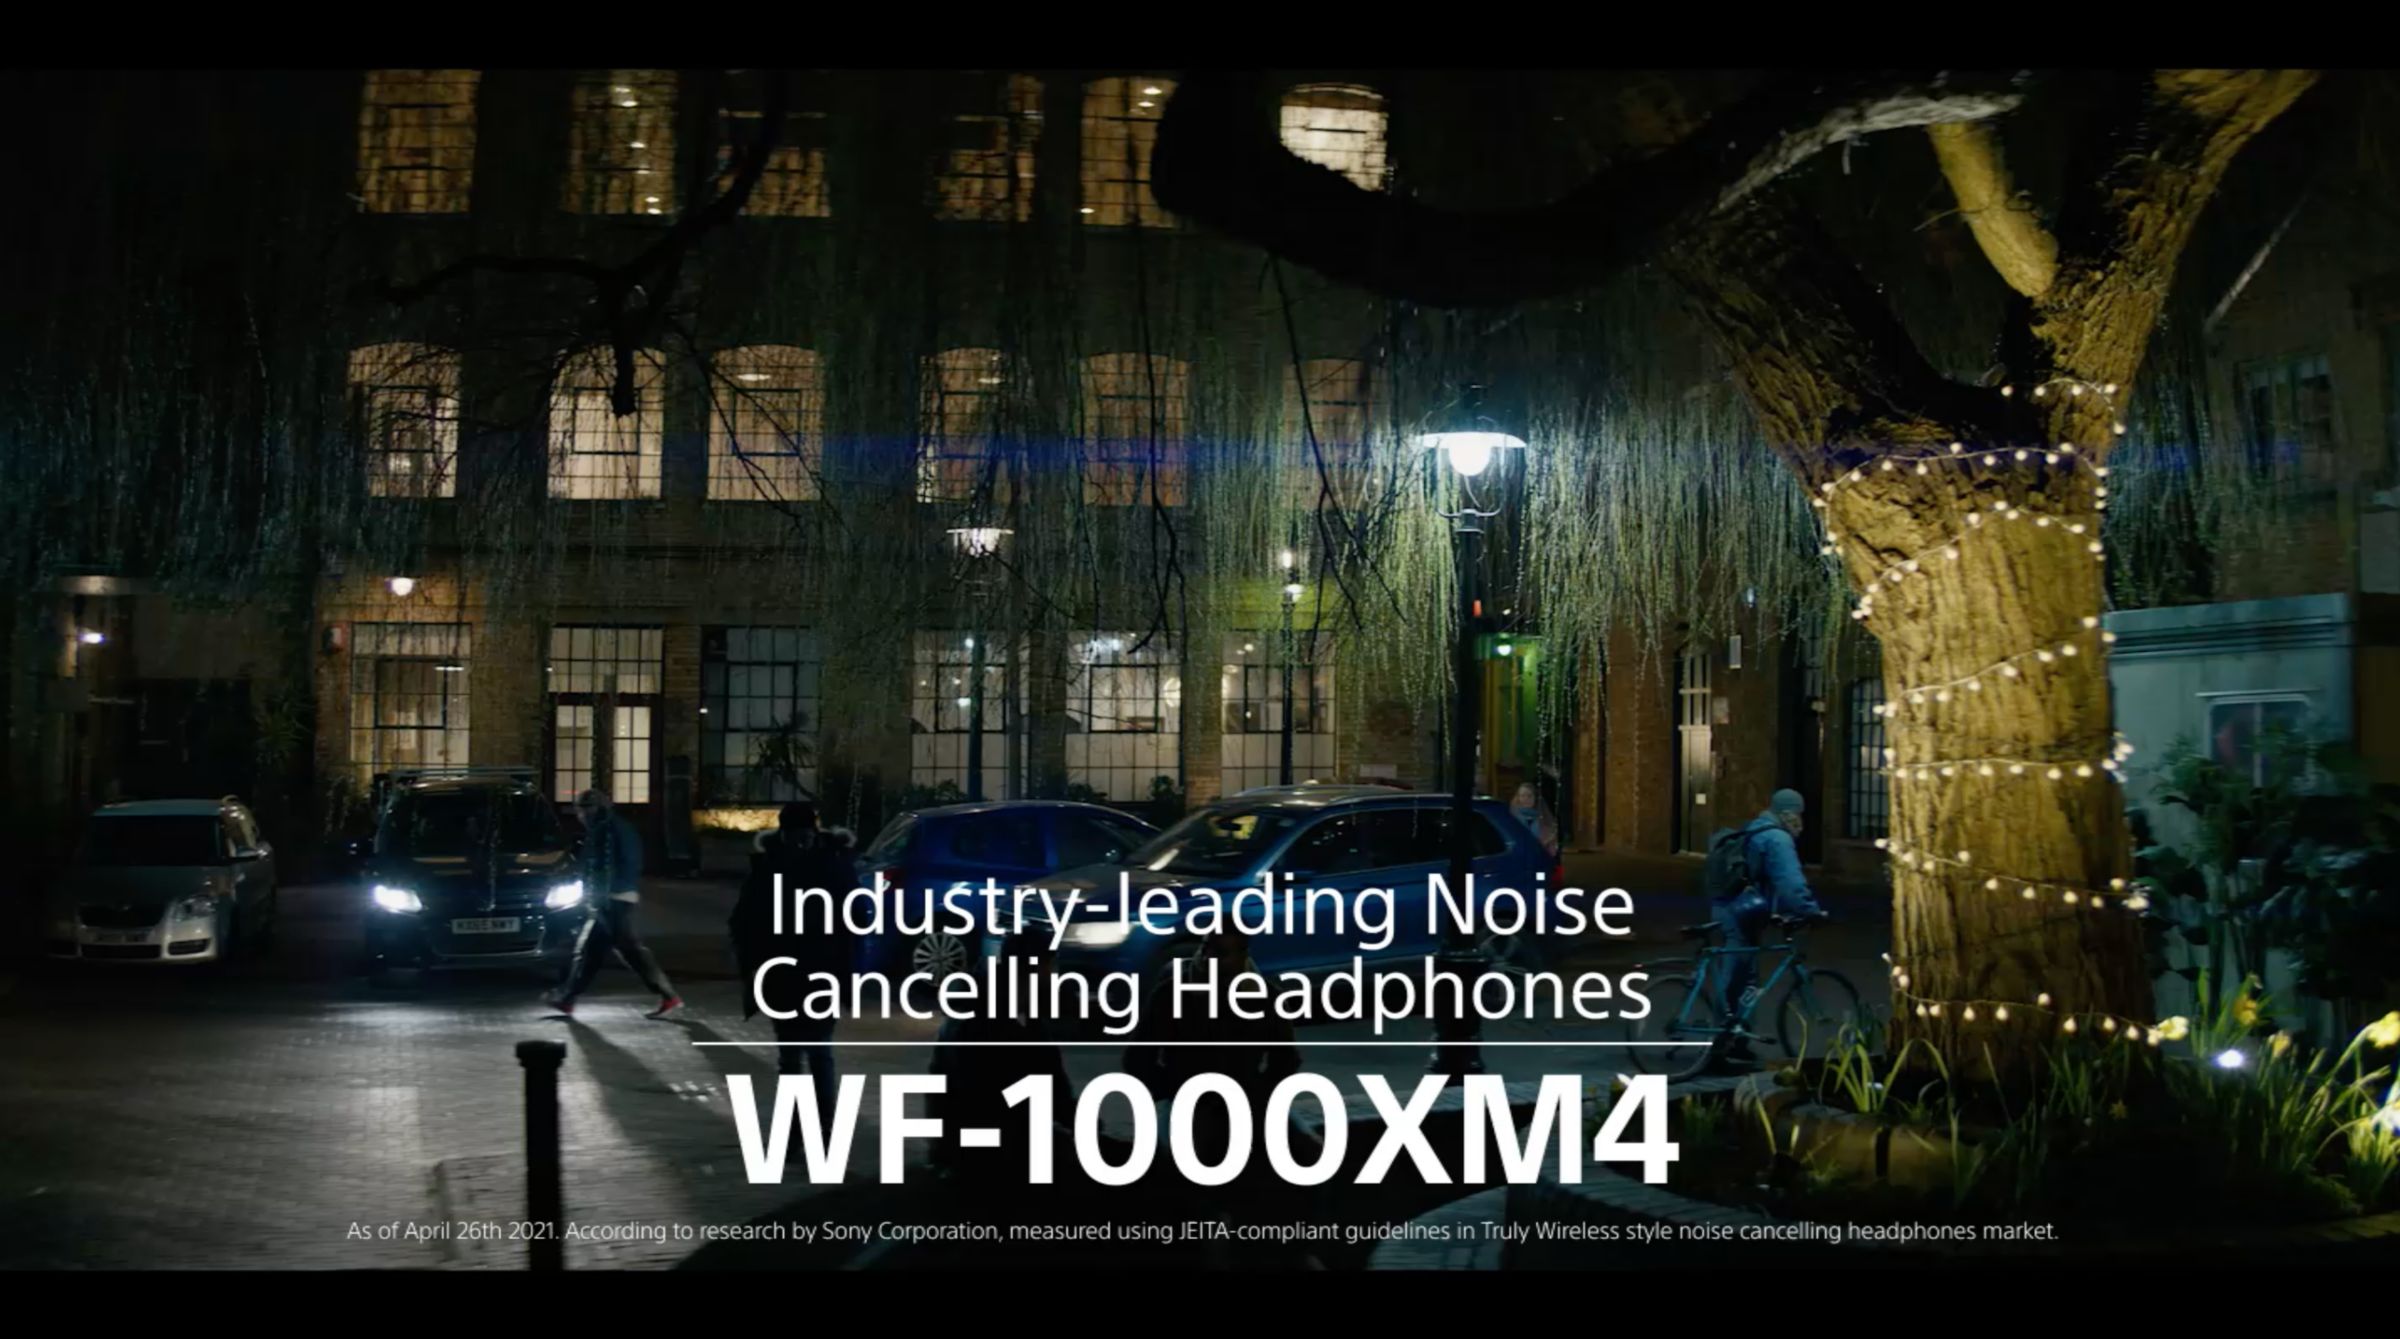 Industry-leading noise cancellation just got even better